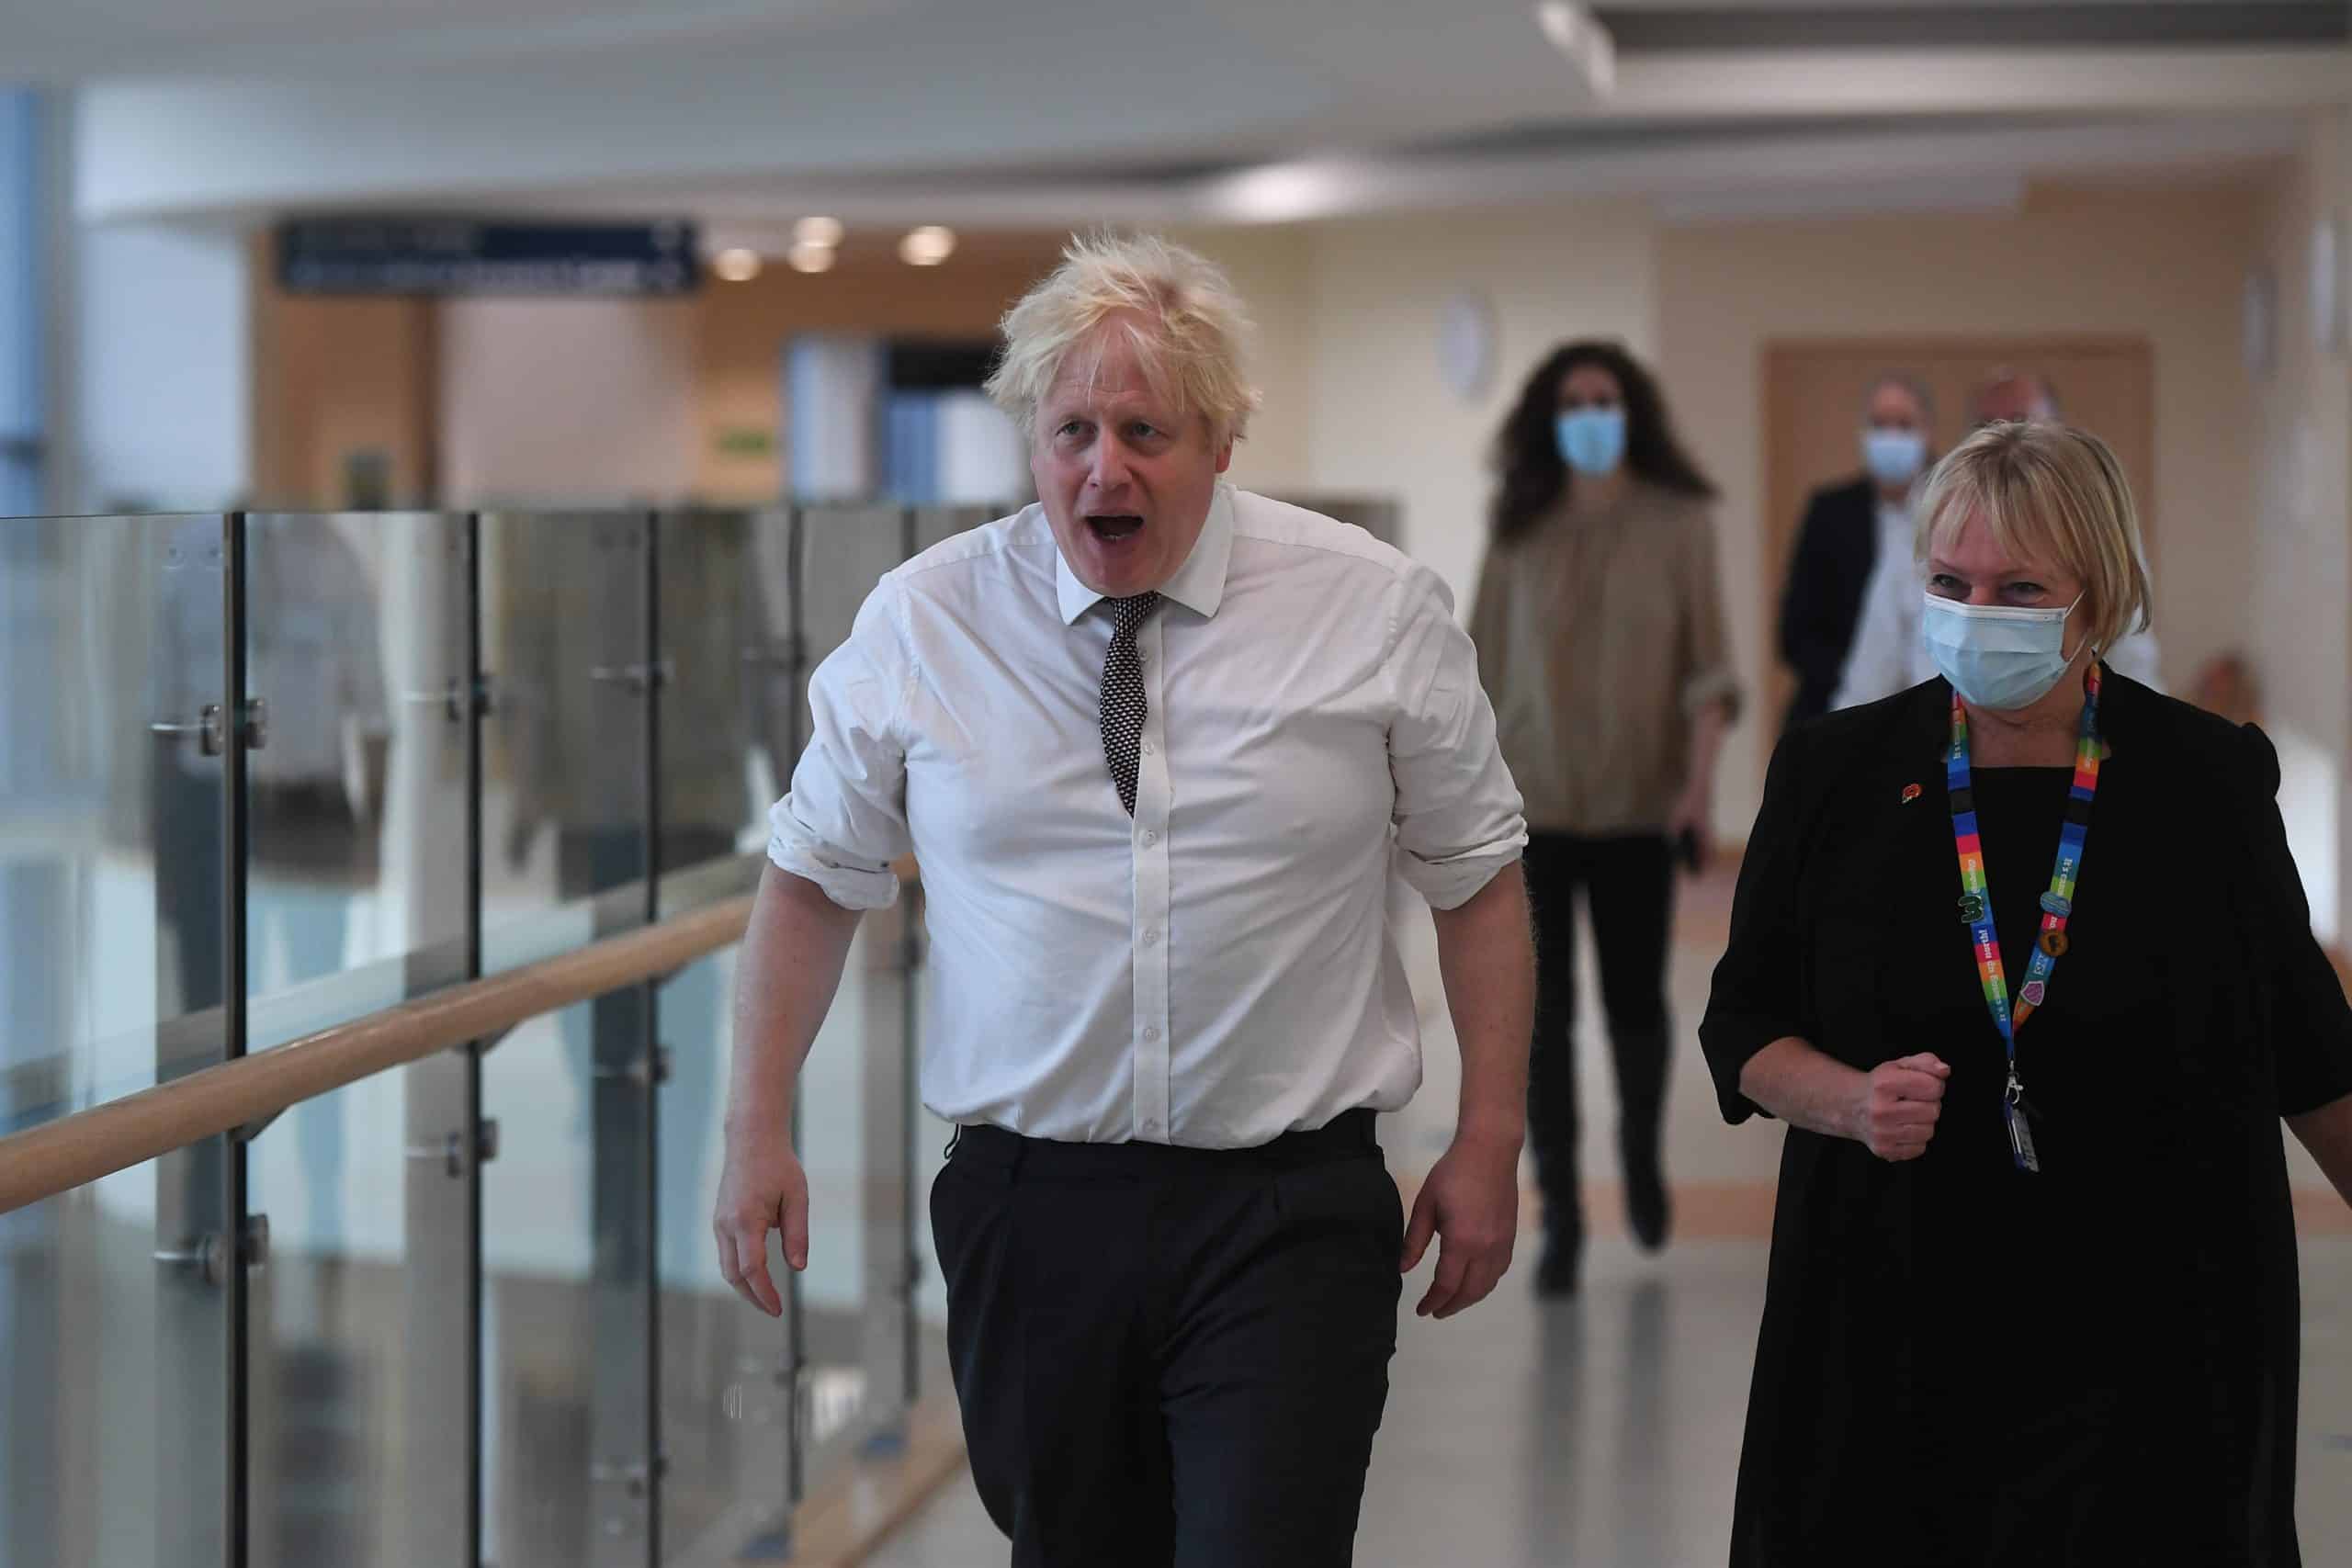 Boris flouts mask guidelines – again – at busy London theatre